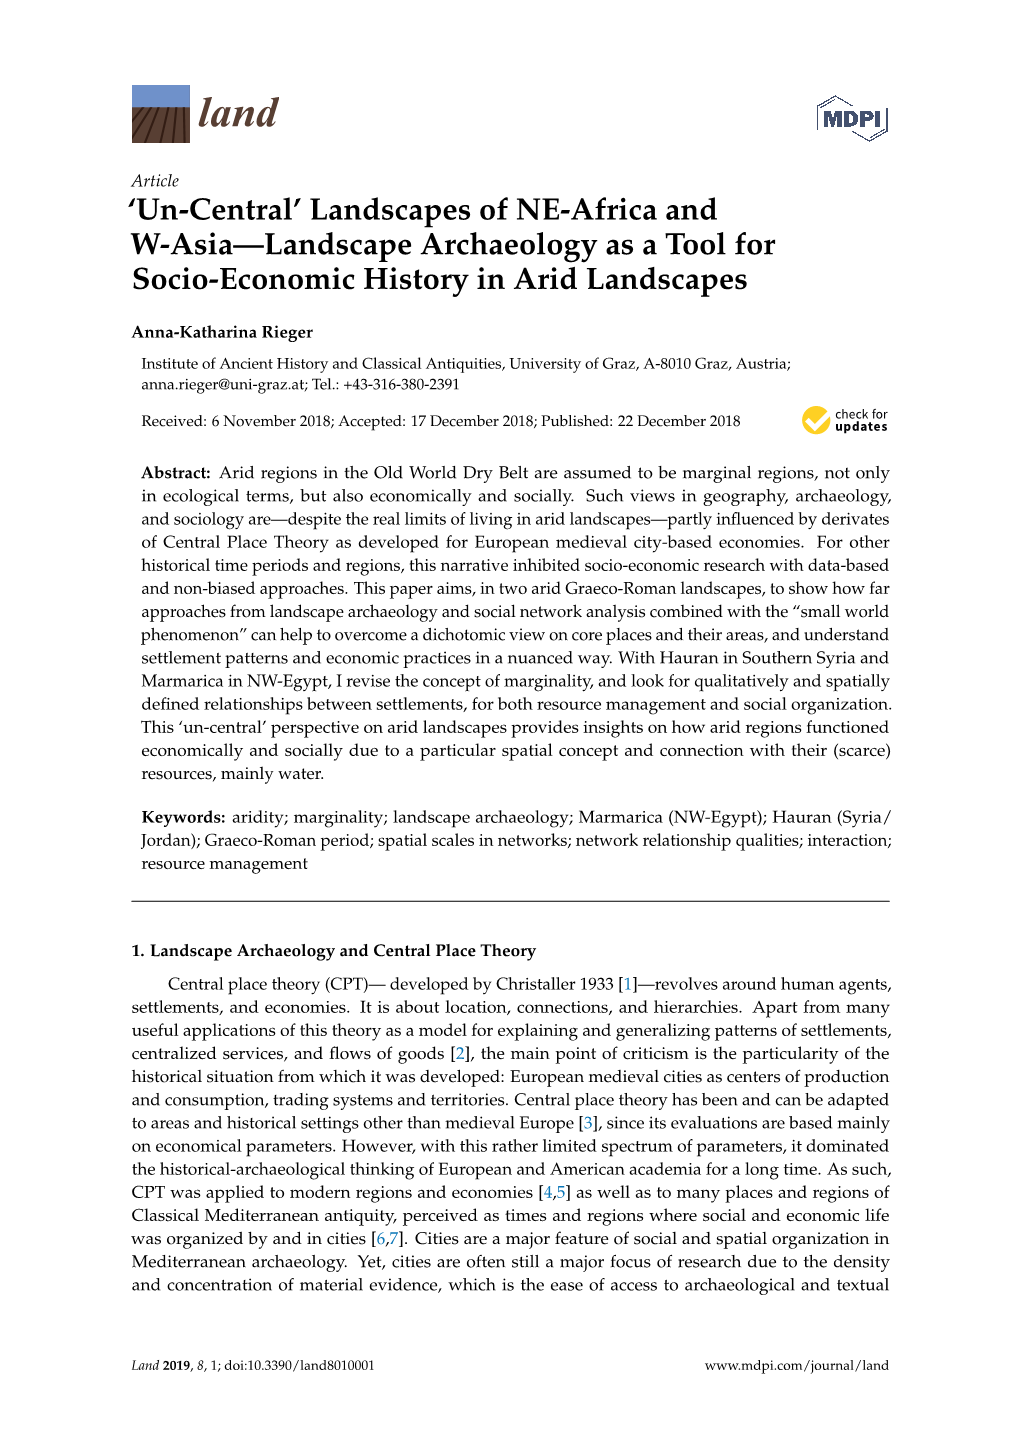 Landscapes of NE-Africa and W-Asia—Landscape Archaeology As a Tool for Socio-Economic History in Arid Landscapes